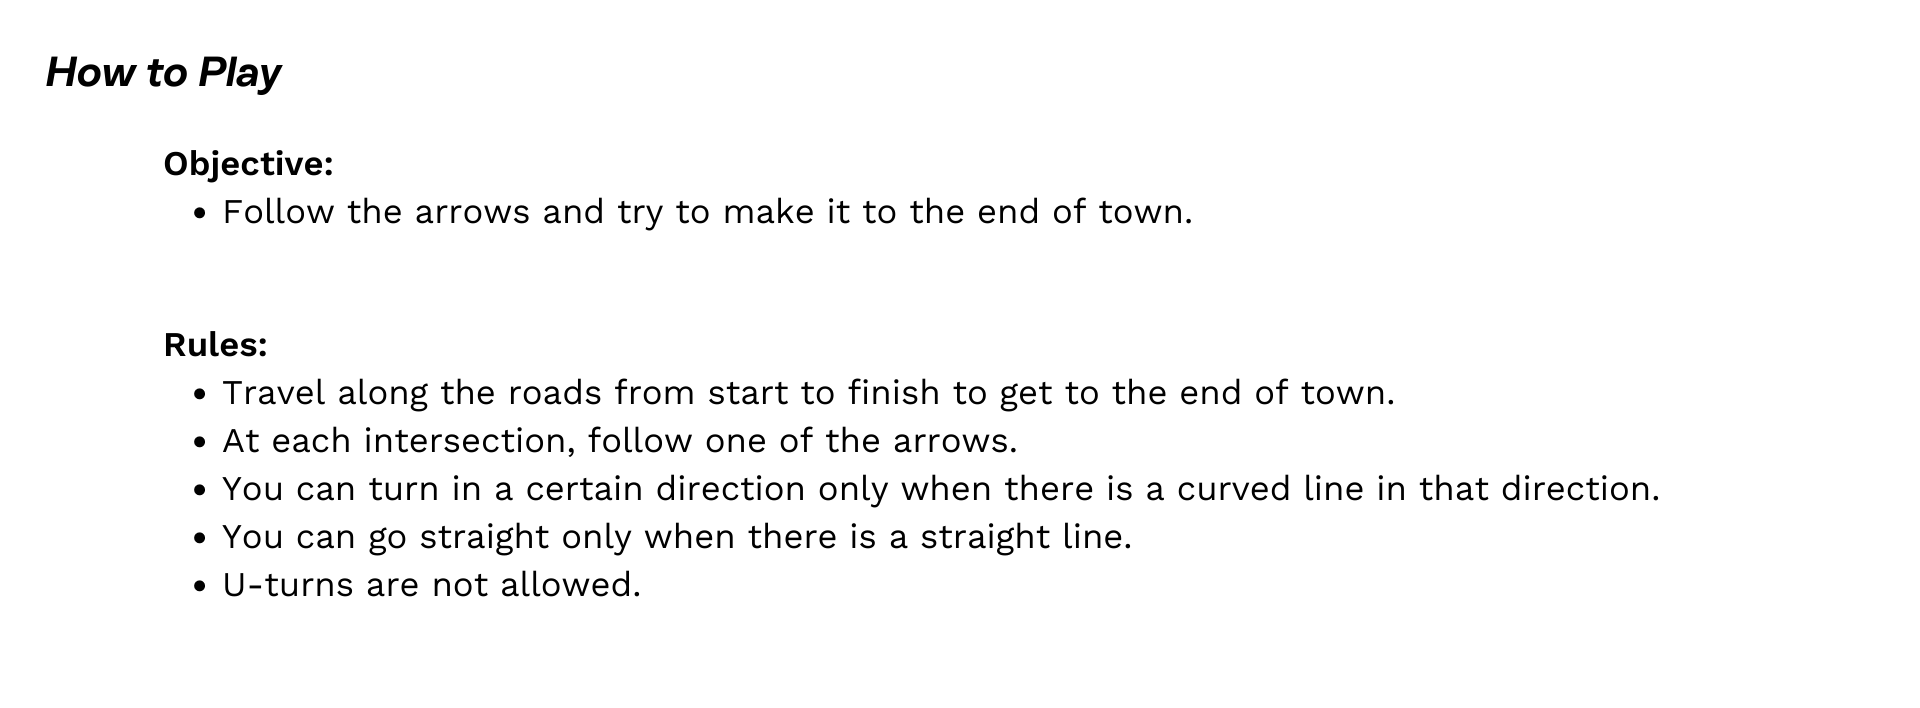 Rules: Travel along the roads from start to finish to get to the end of town. At each intersection, follow one of the arrows. You can turn in a certain direction only when there is a curved line in that direction. You can go straight only when there is a straight line. U-turns are not allowed.